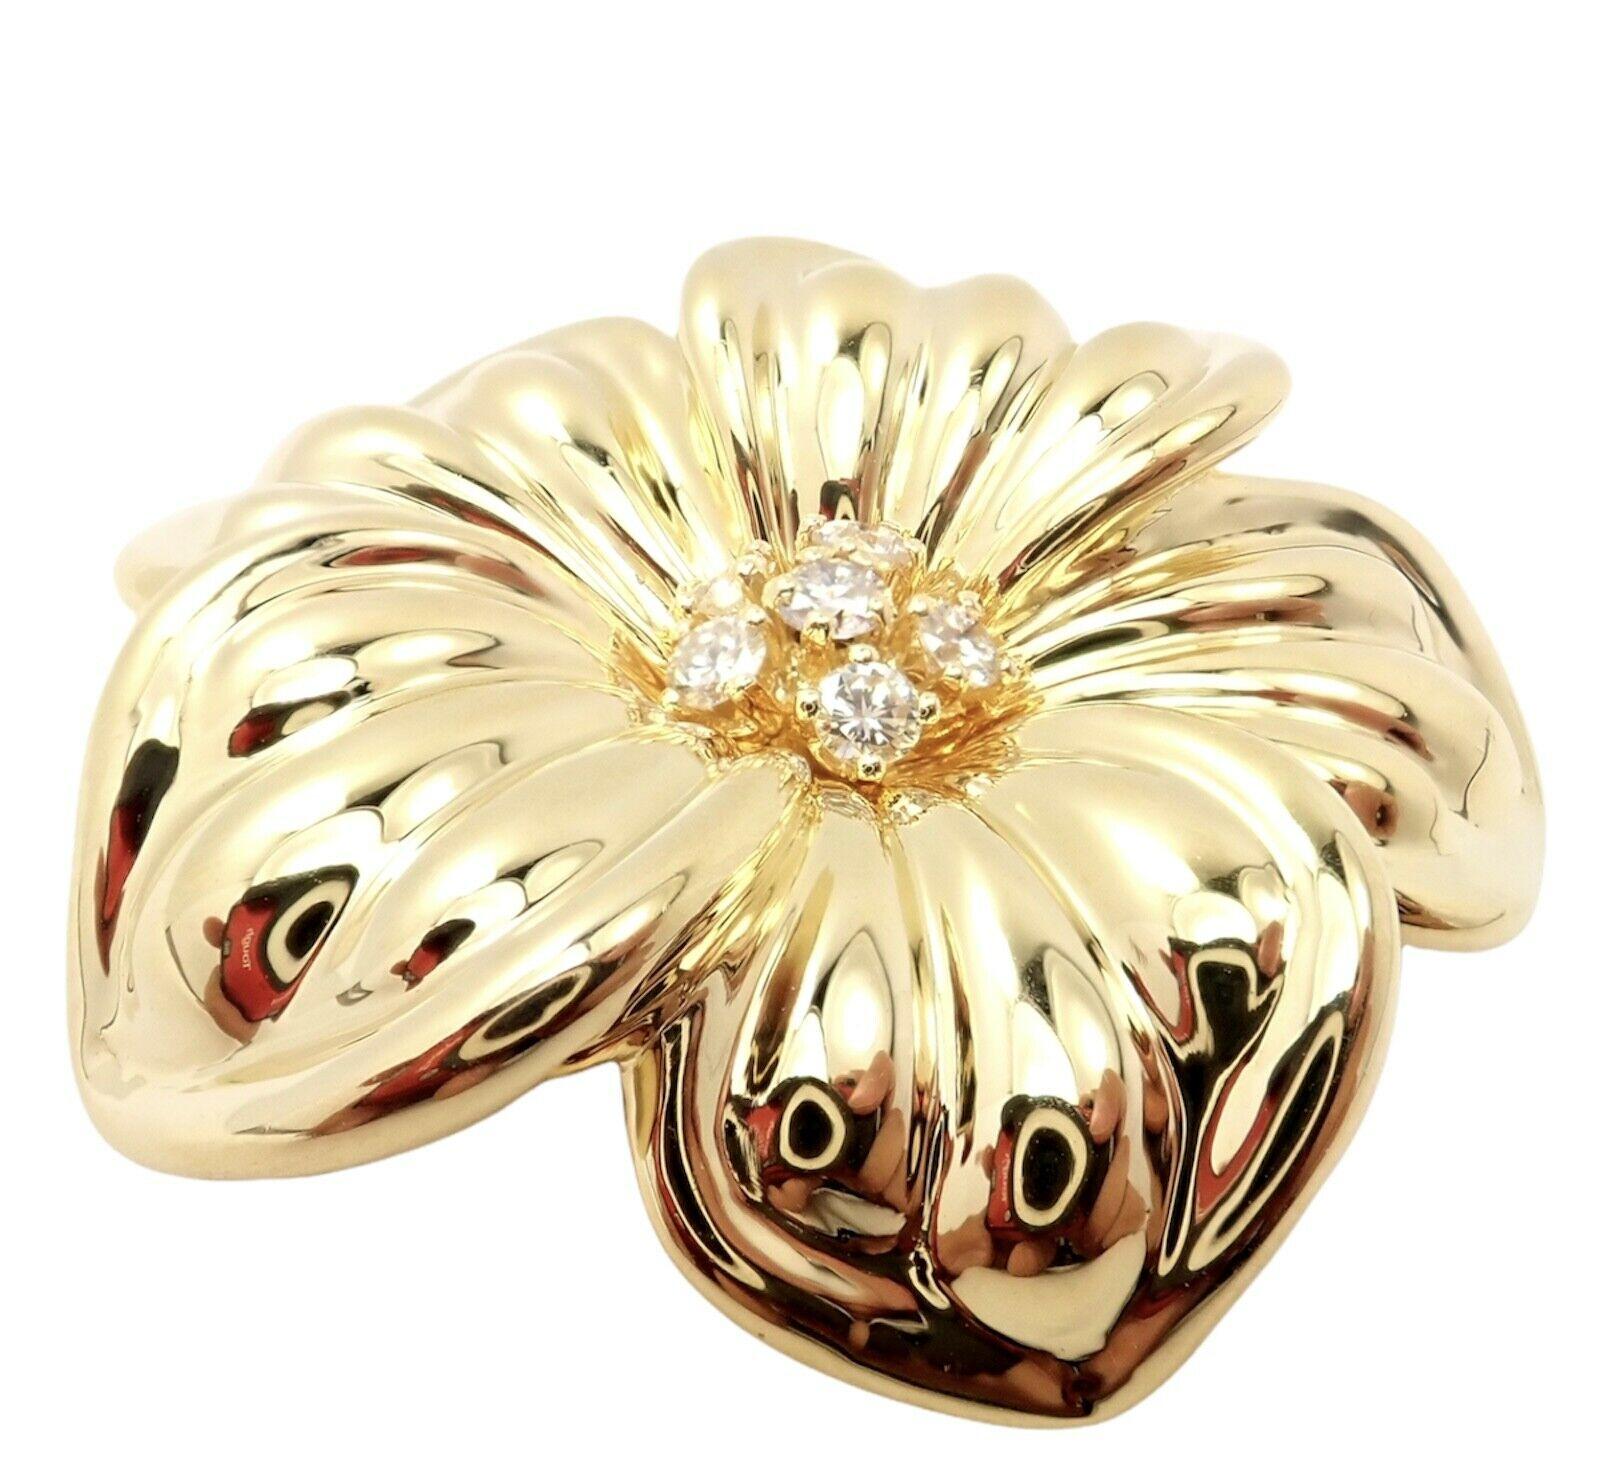 Van Cleef & Arpels Diamond Magnolia Flower Yellow Gold Pin Brooch In Excellent Condition For Sale In Holland, PA